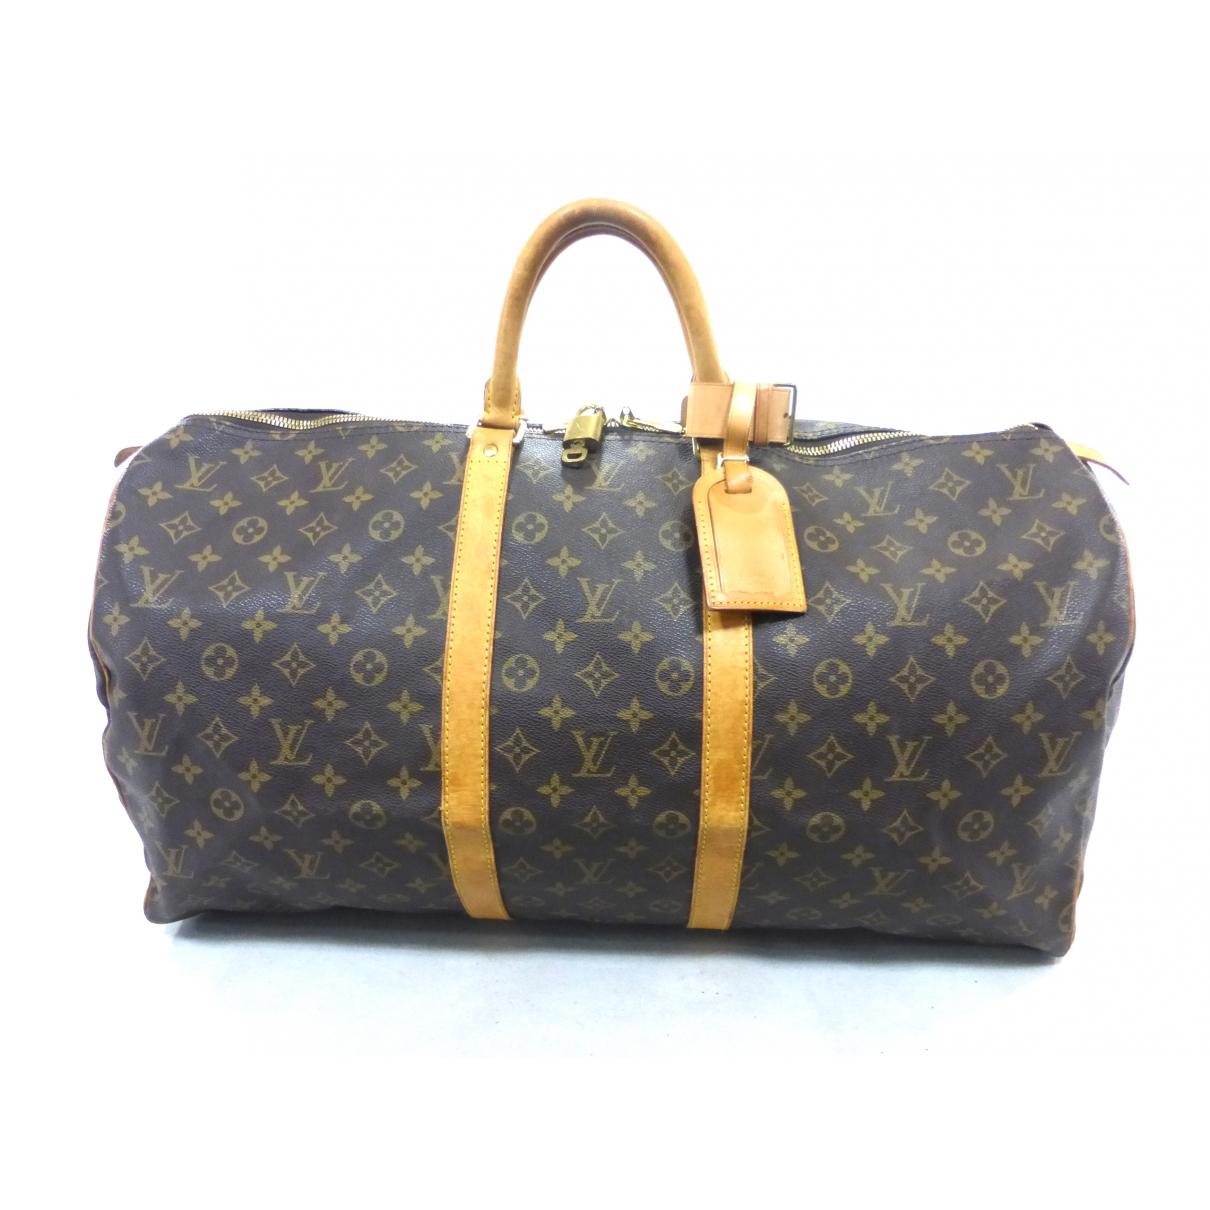 Lyst - Louis Vuitton Pre-owned Vintage Keepall Brown Leather Travel Bags in Brown